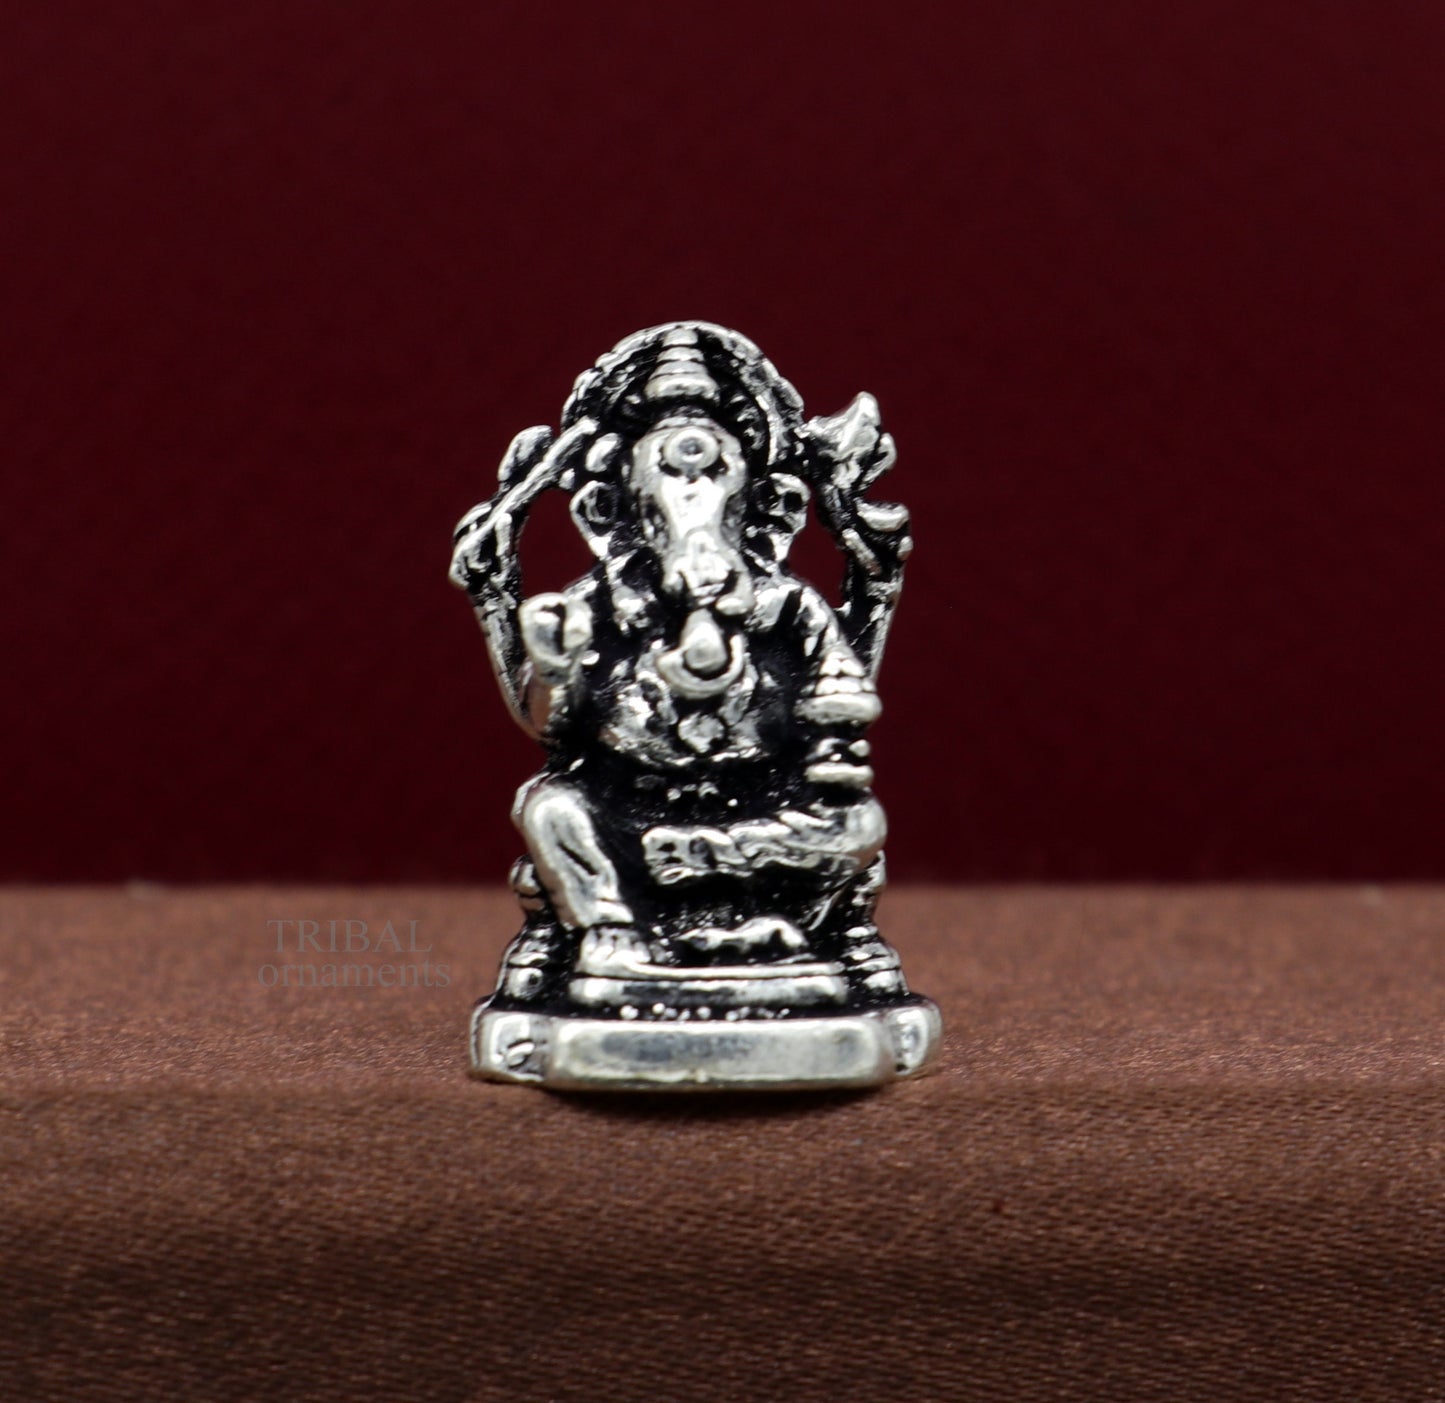 925 Sterling silver Divine lord idol Ganesha statue art, best puja figurine for home temple for wealth and prosperity gift art art521 - TRIBAL ORNAMENTS